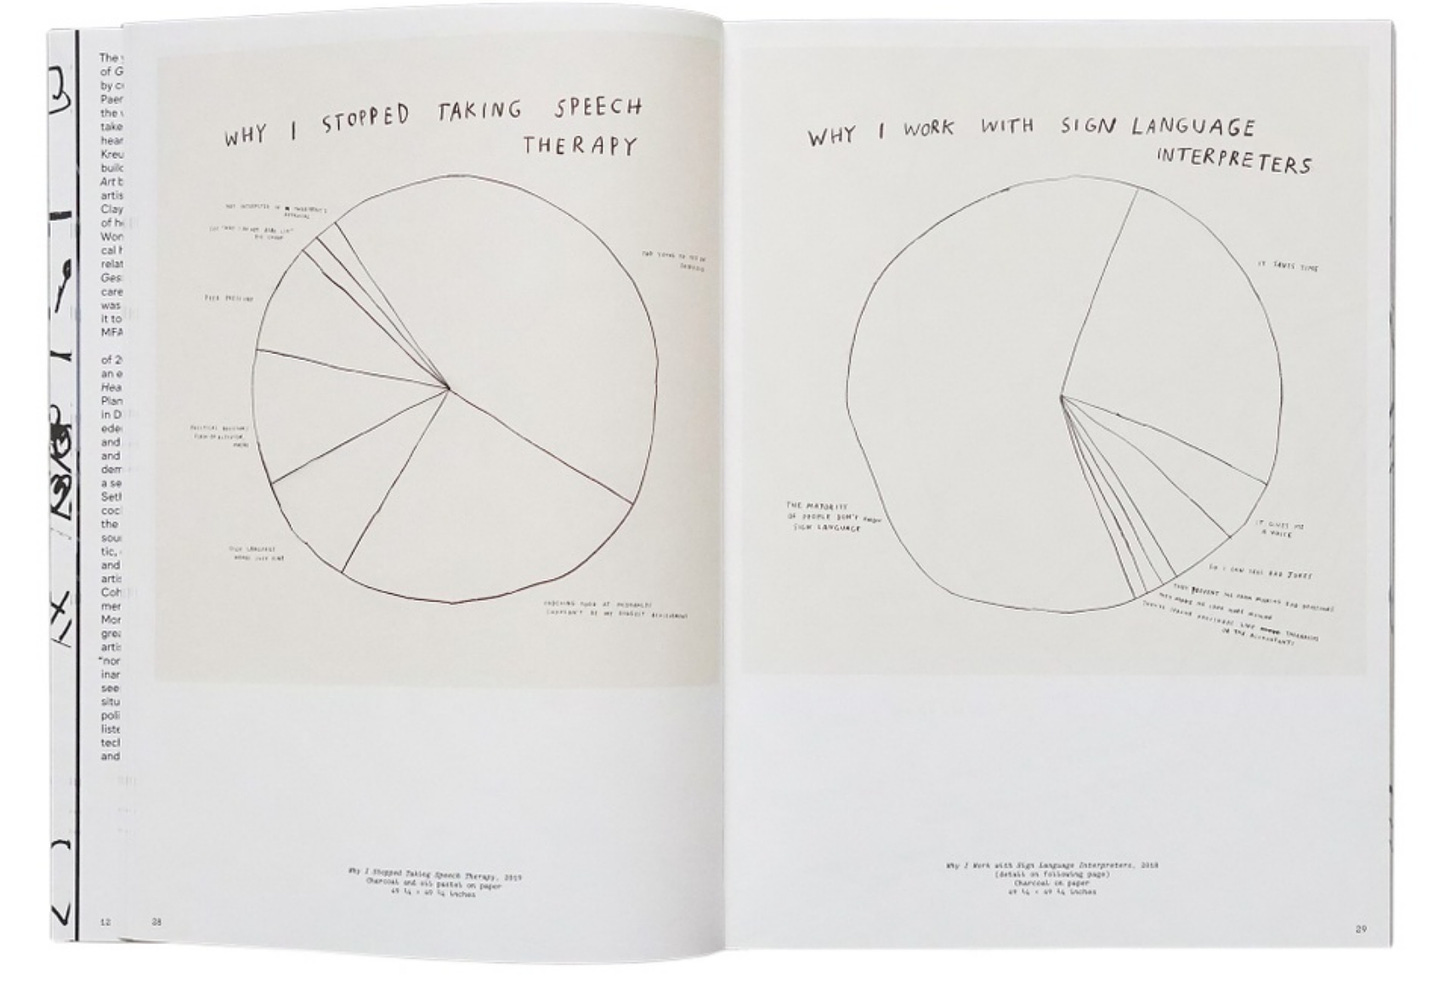 A book is opened to a page showing two hand-drawn pie charts. One says WHY I STOPPED TAKING SPEECH THERAPY and the other WHY I WORK WITH SIGN LANGUAGE INTERPRETERS. Each has many portions of the pie labeled in small writing.